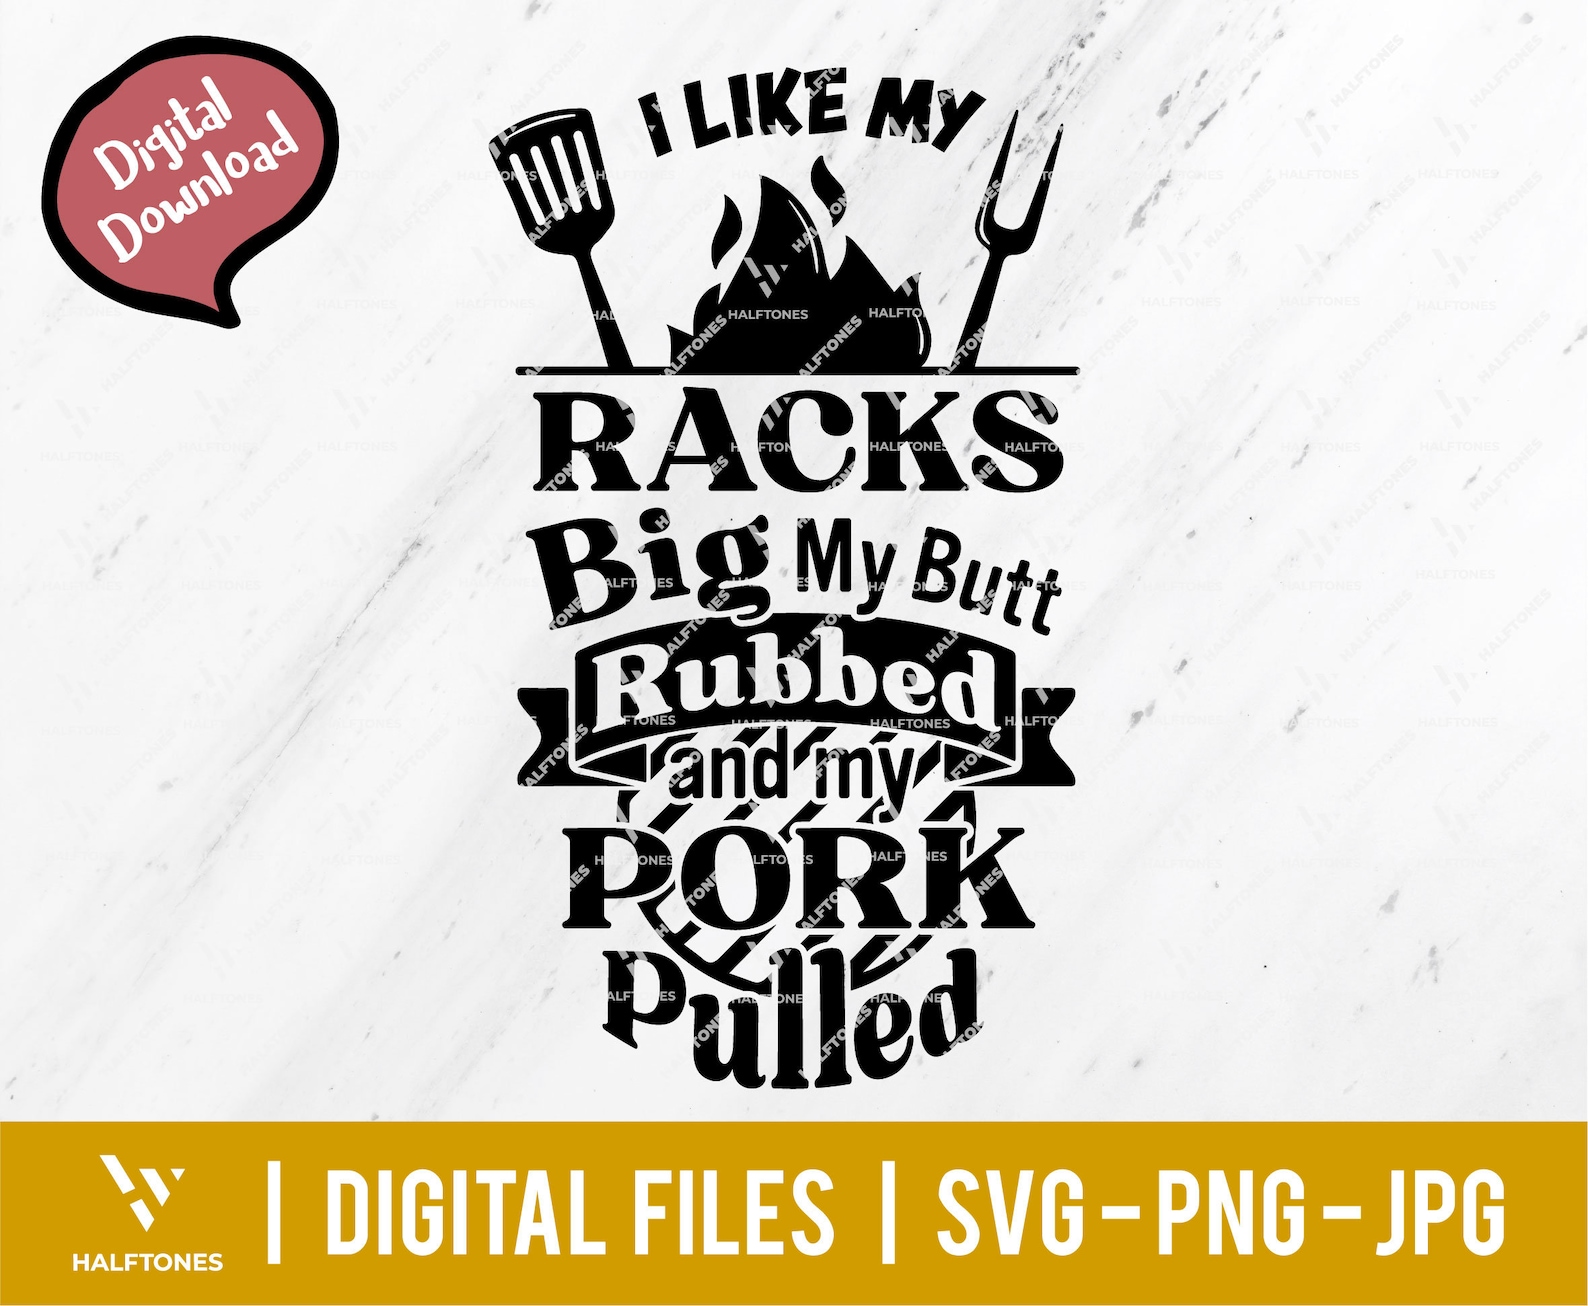 I Like My Racks Big My Butt Rubbed And My Por Pulled Svg Bbq Etsy 